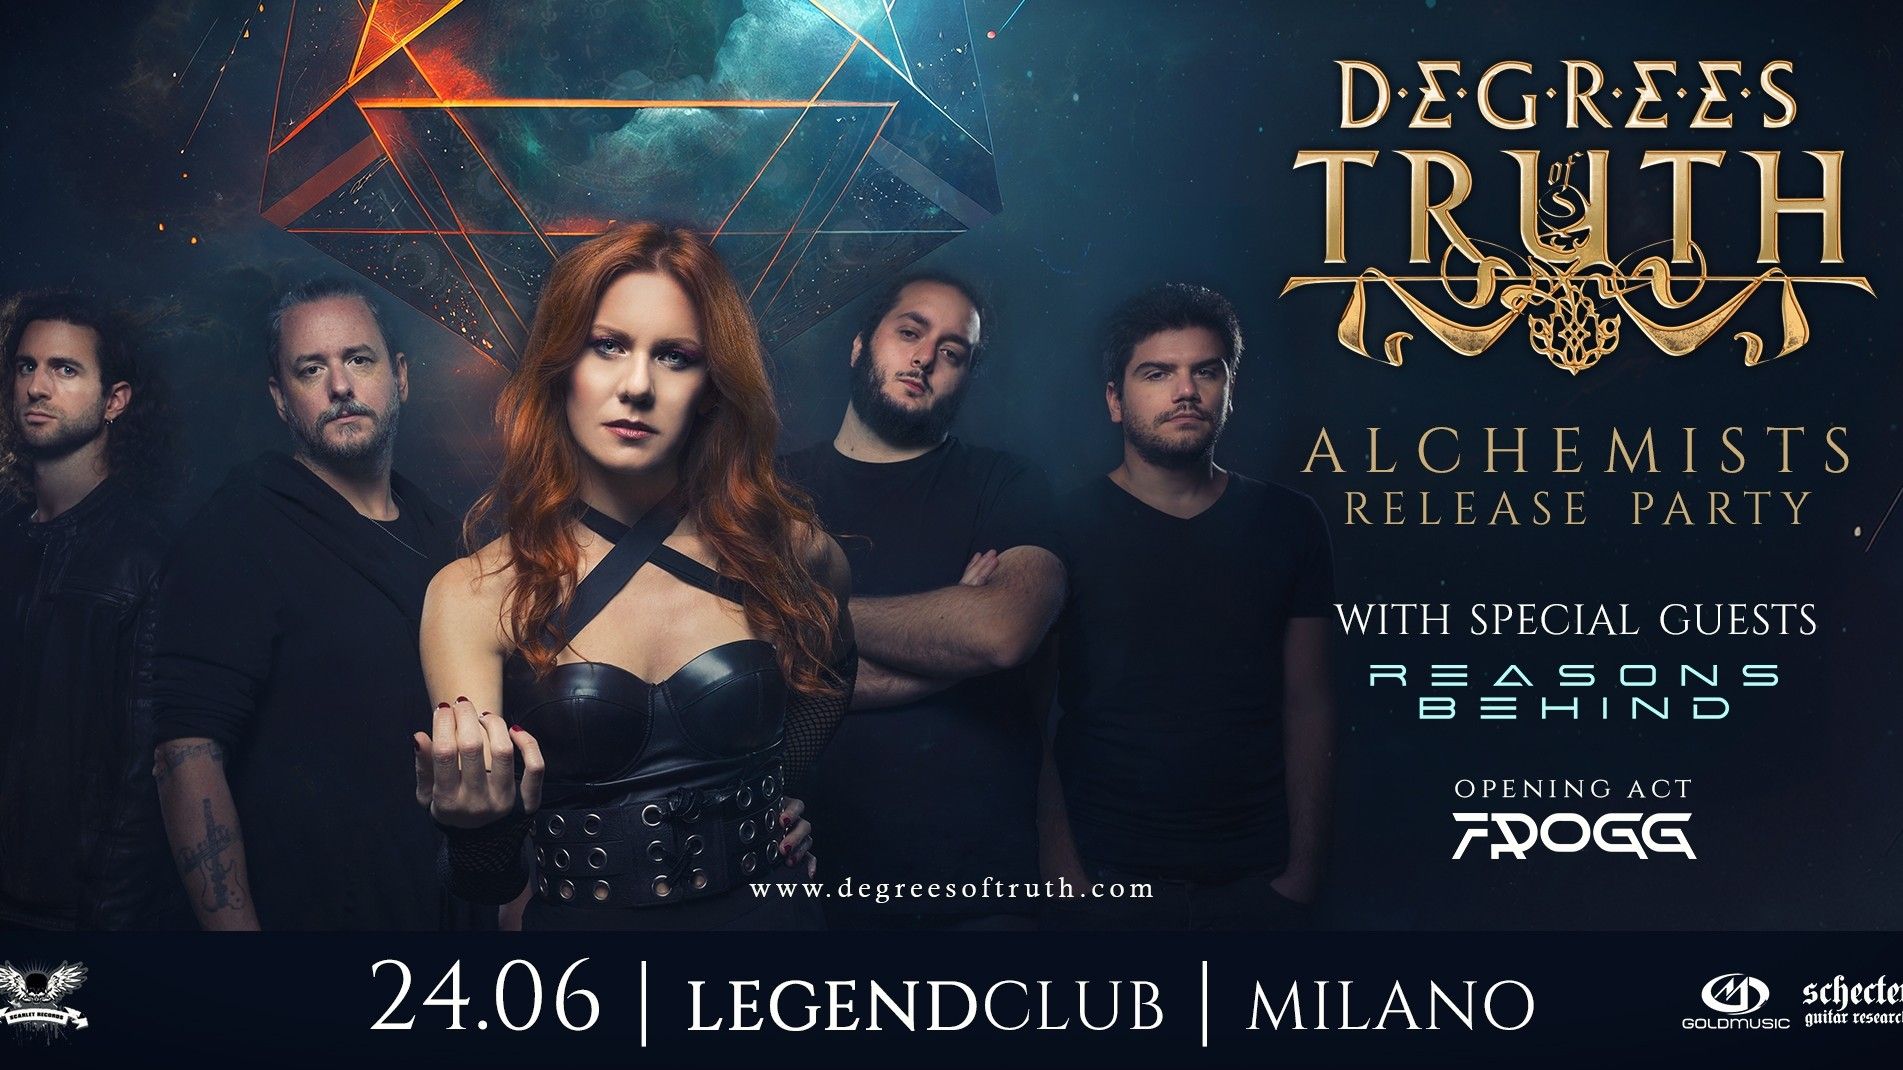 Degrees of Truth "Alchemists" Release Party + Reasons Behind + Frogg